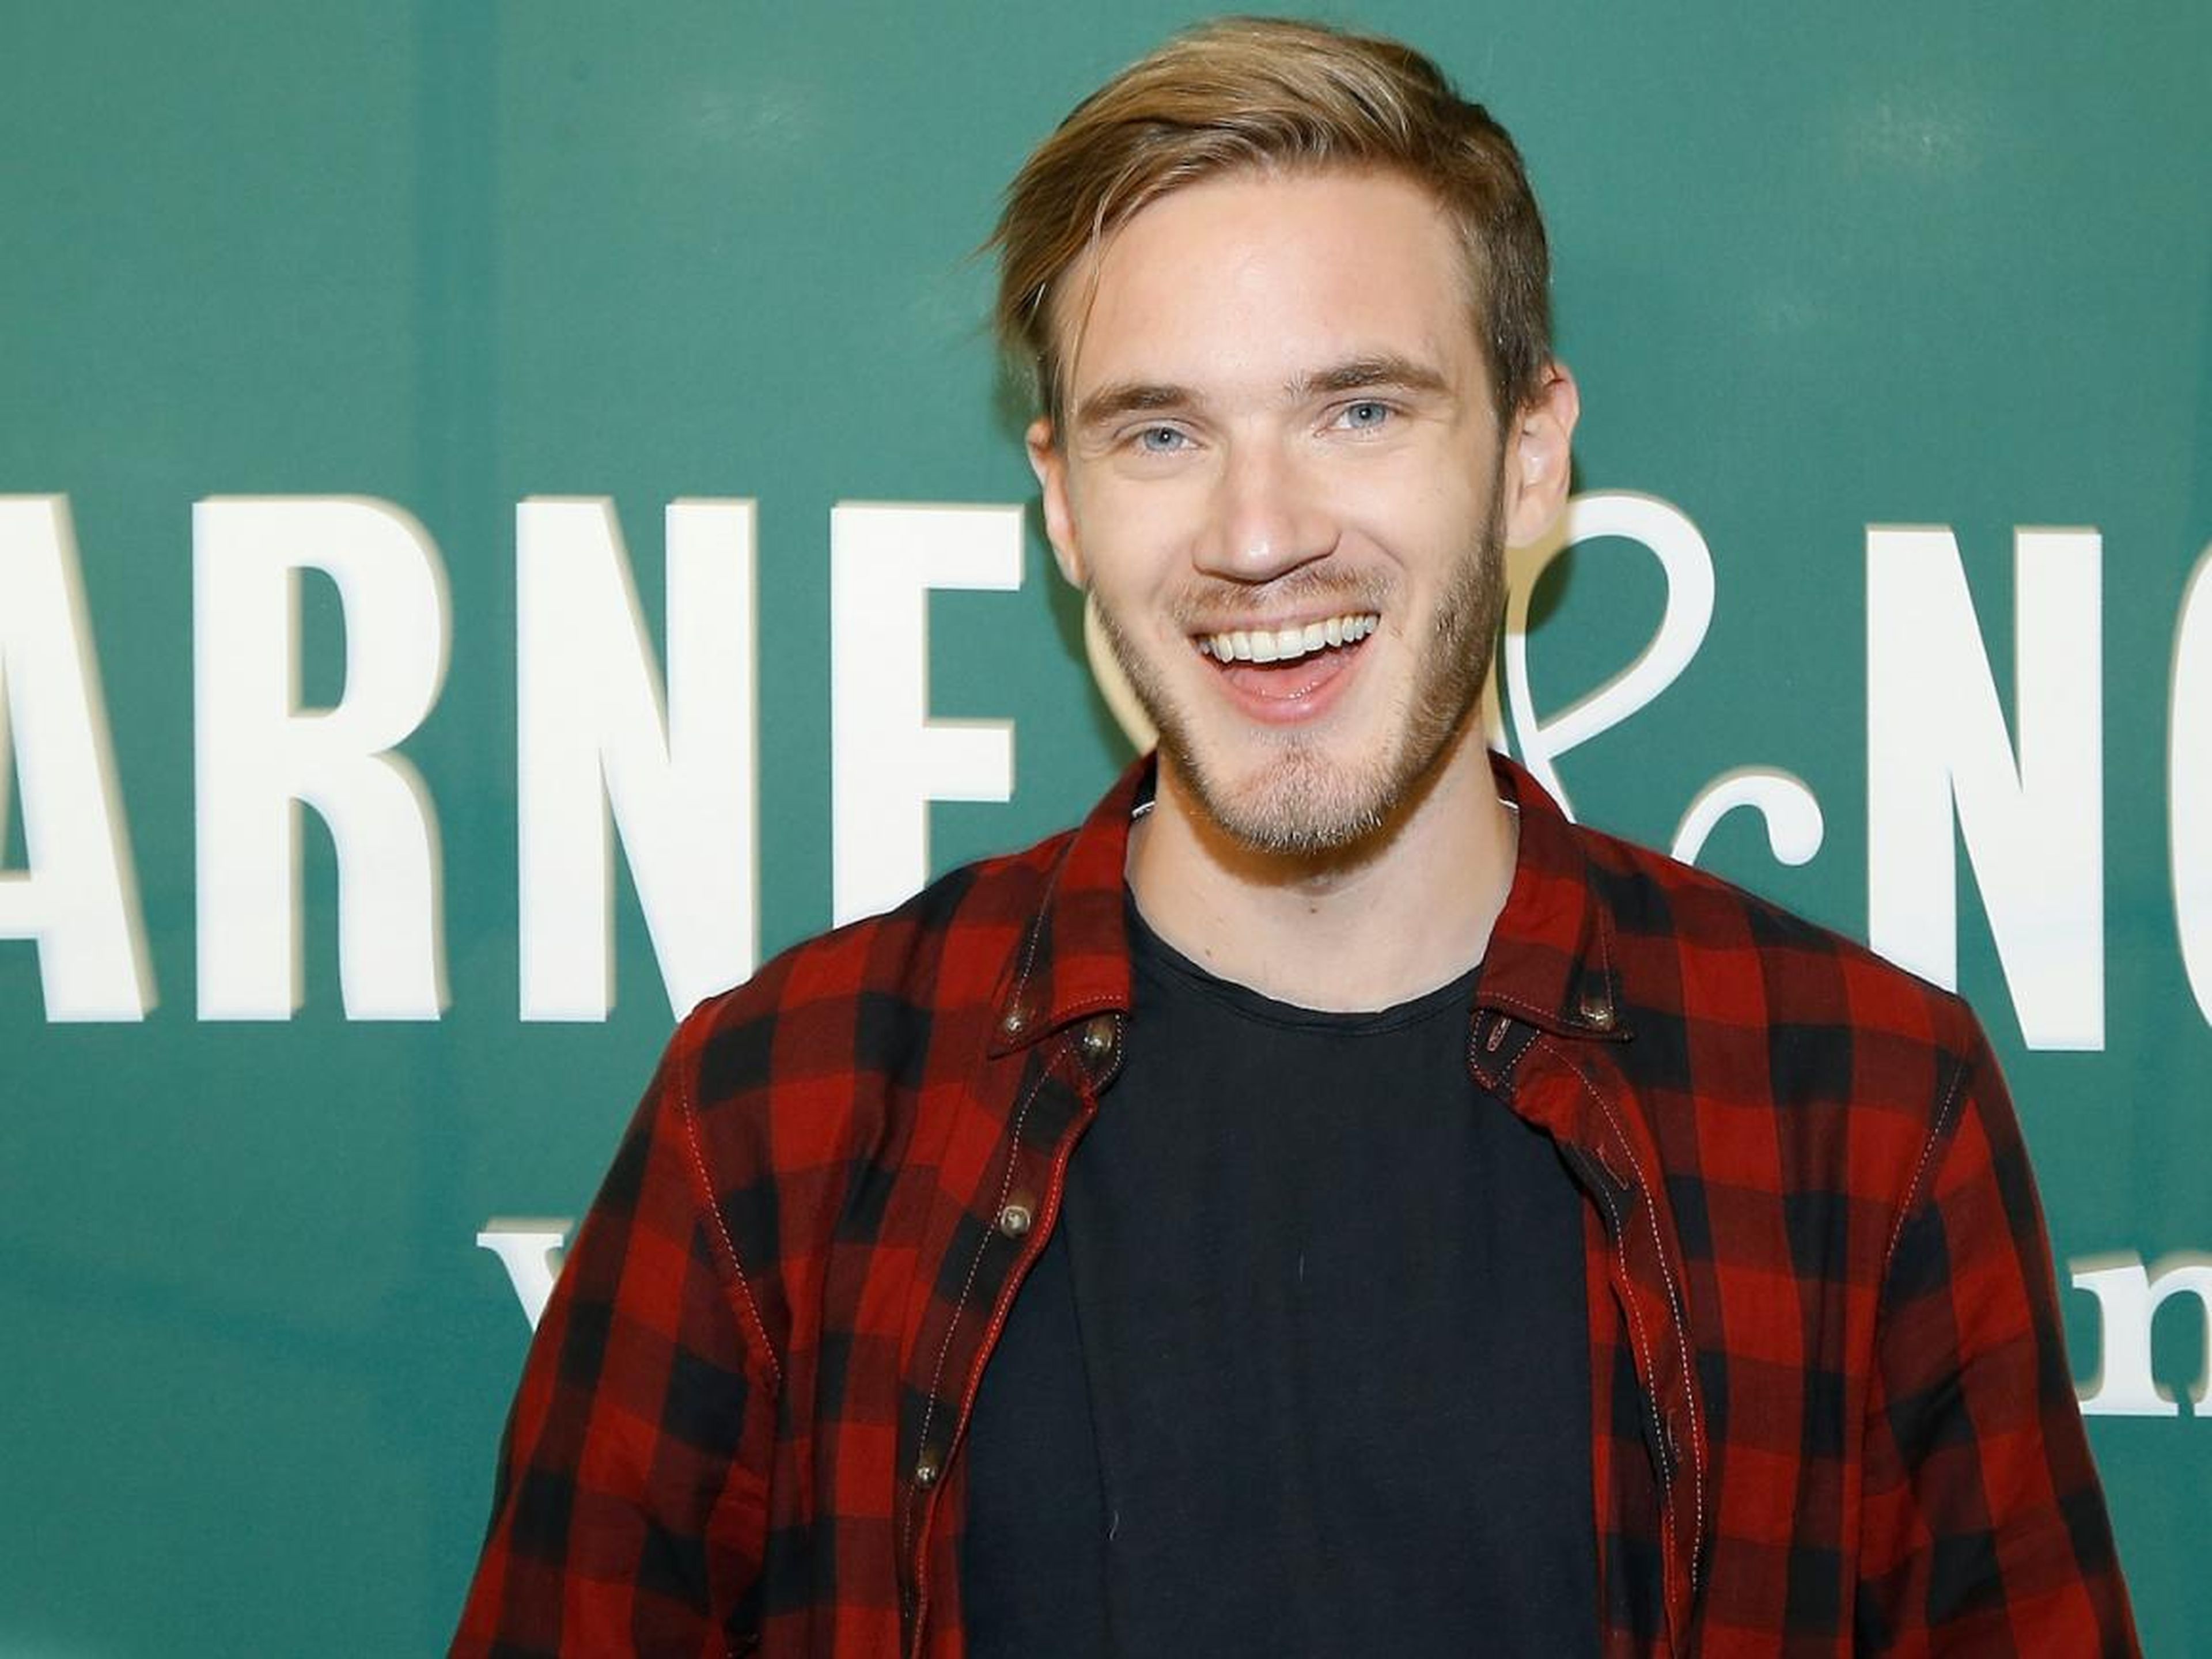 Kjellberg was born October 24, 1989, in a city in southwest Sweden called Gothenburg. As a child, Kjellberg quickly developed a passion for video games, despite his parents wanting him to play less.